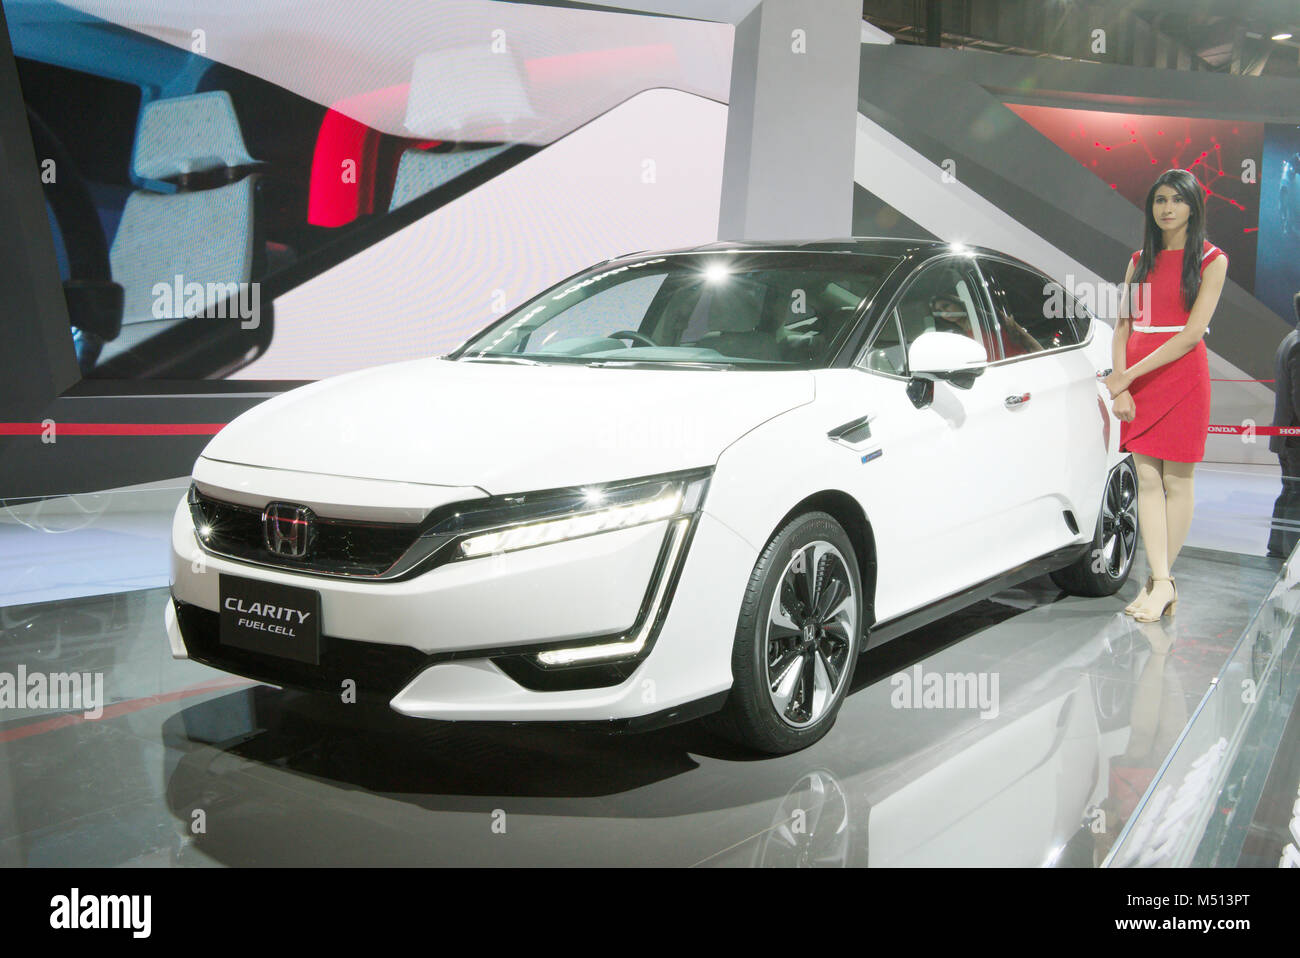 Greater Noida, India. 14th February 2018. Honda Clarity Fuel Cell vehicle is on display at Auto Expo 2018 in Greater Noida, India. Stock Photo